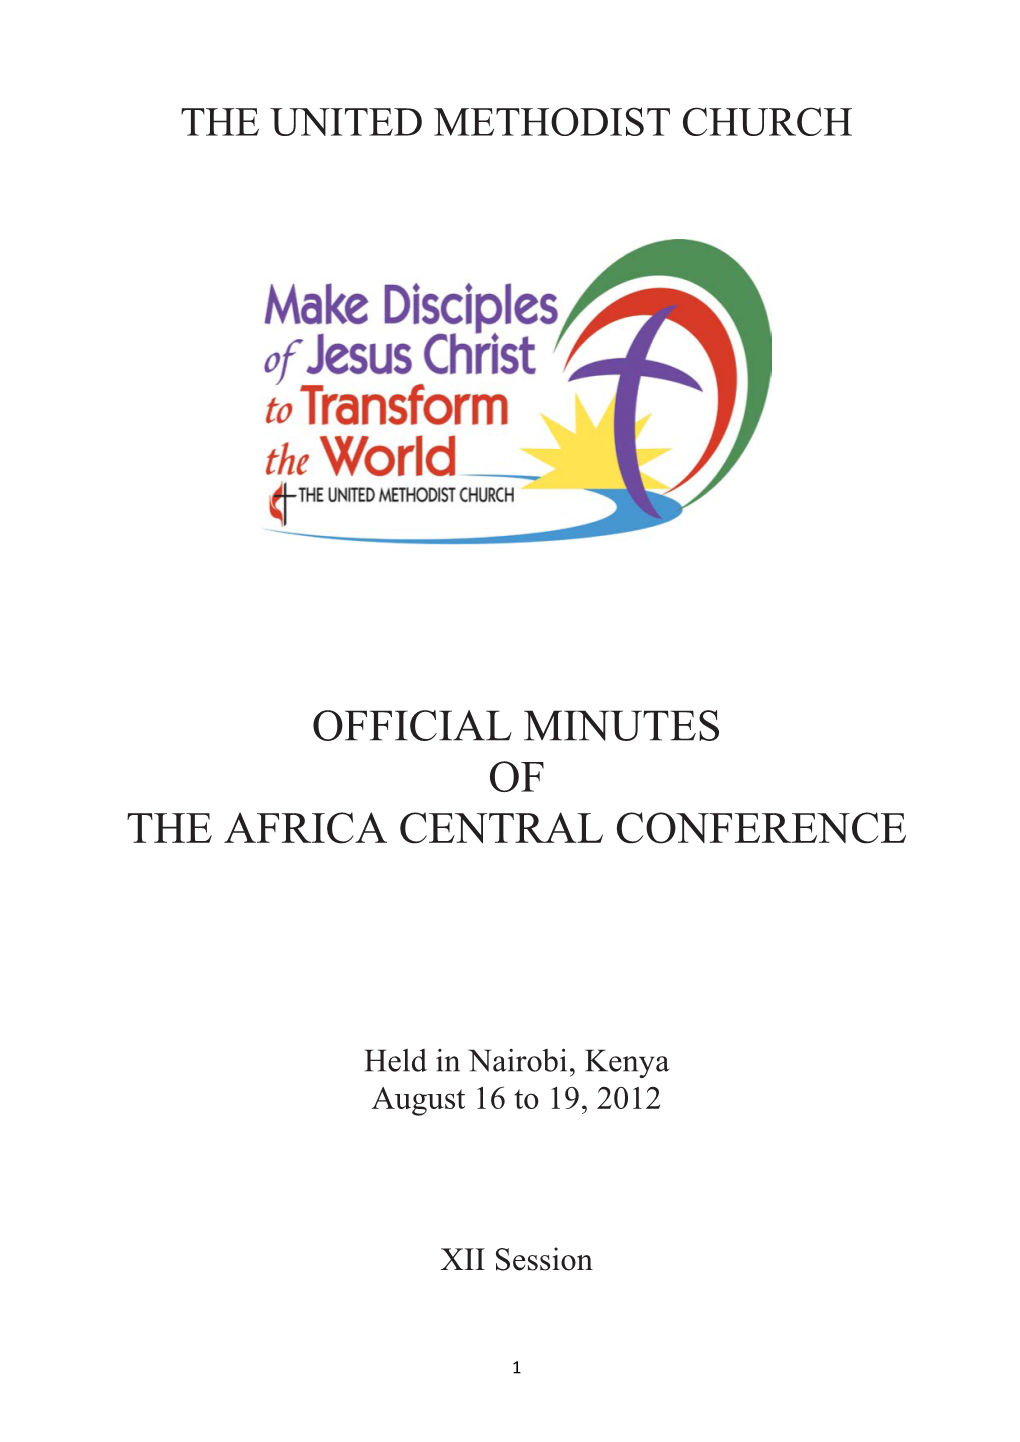 Official Minutes of the Africa Central Conference